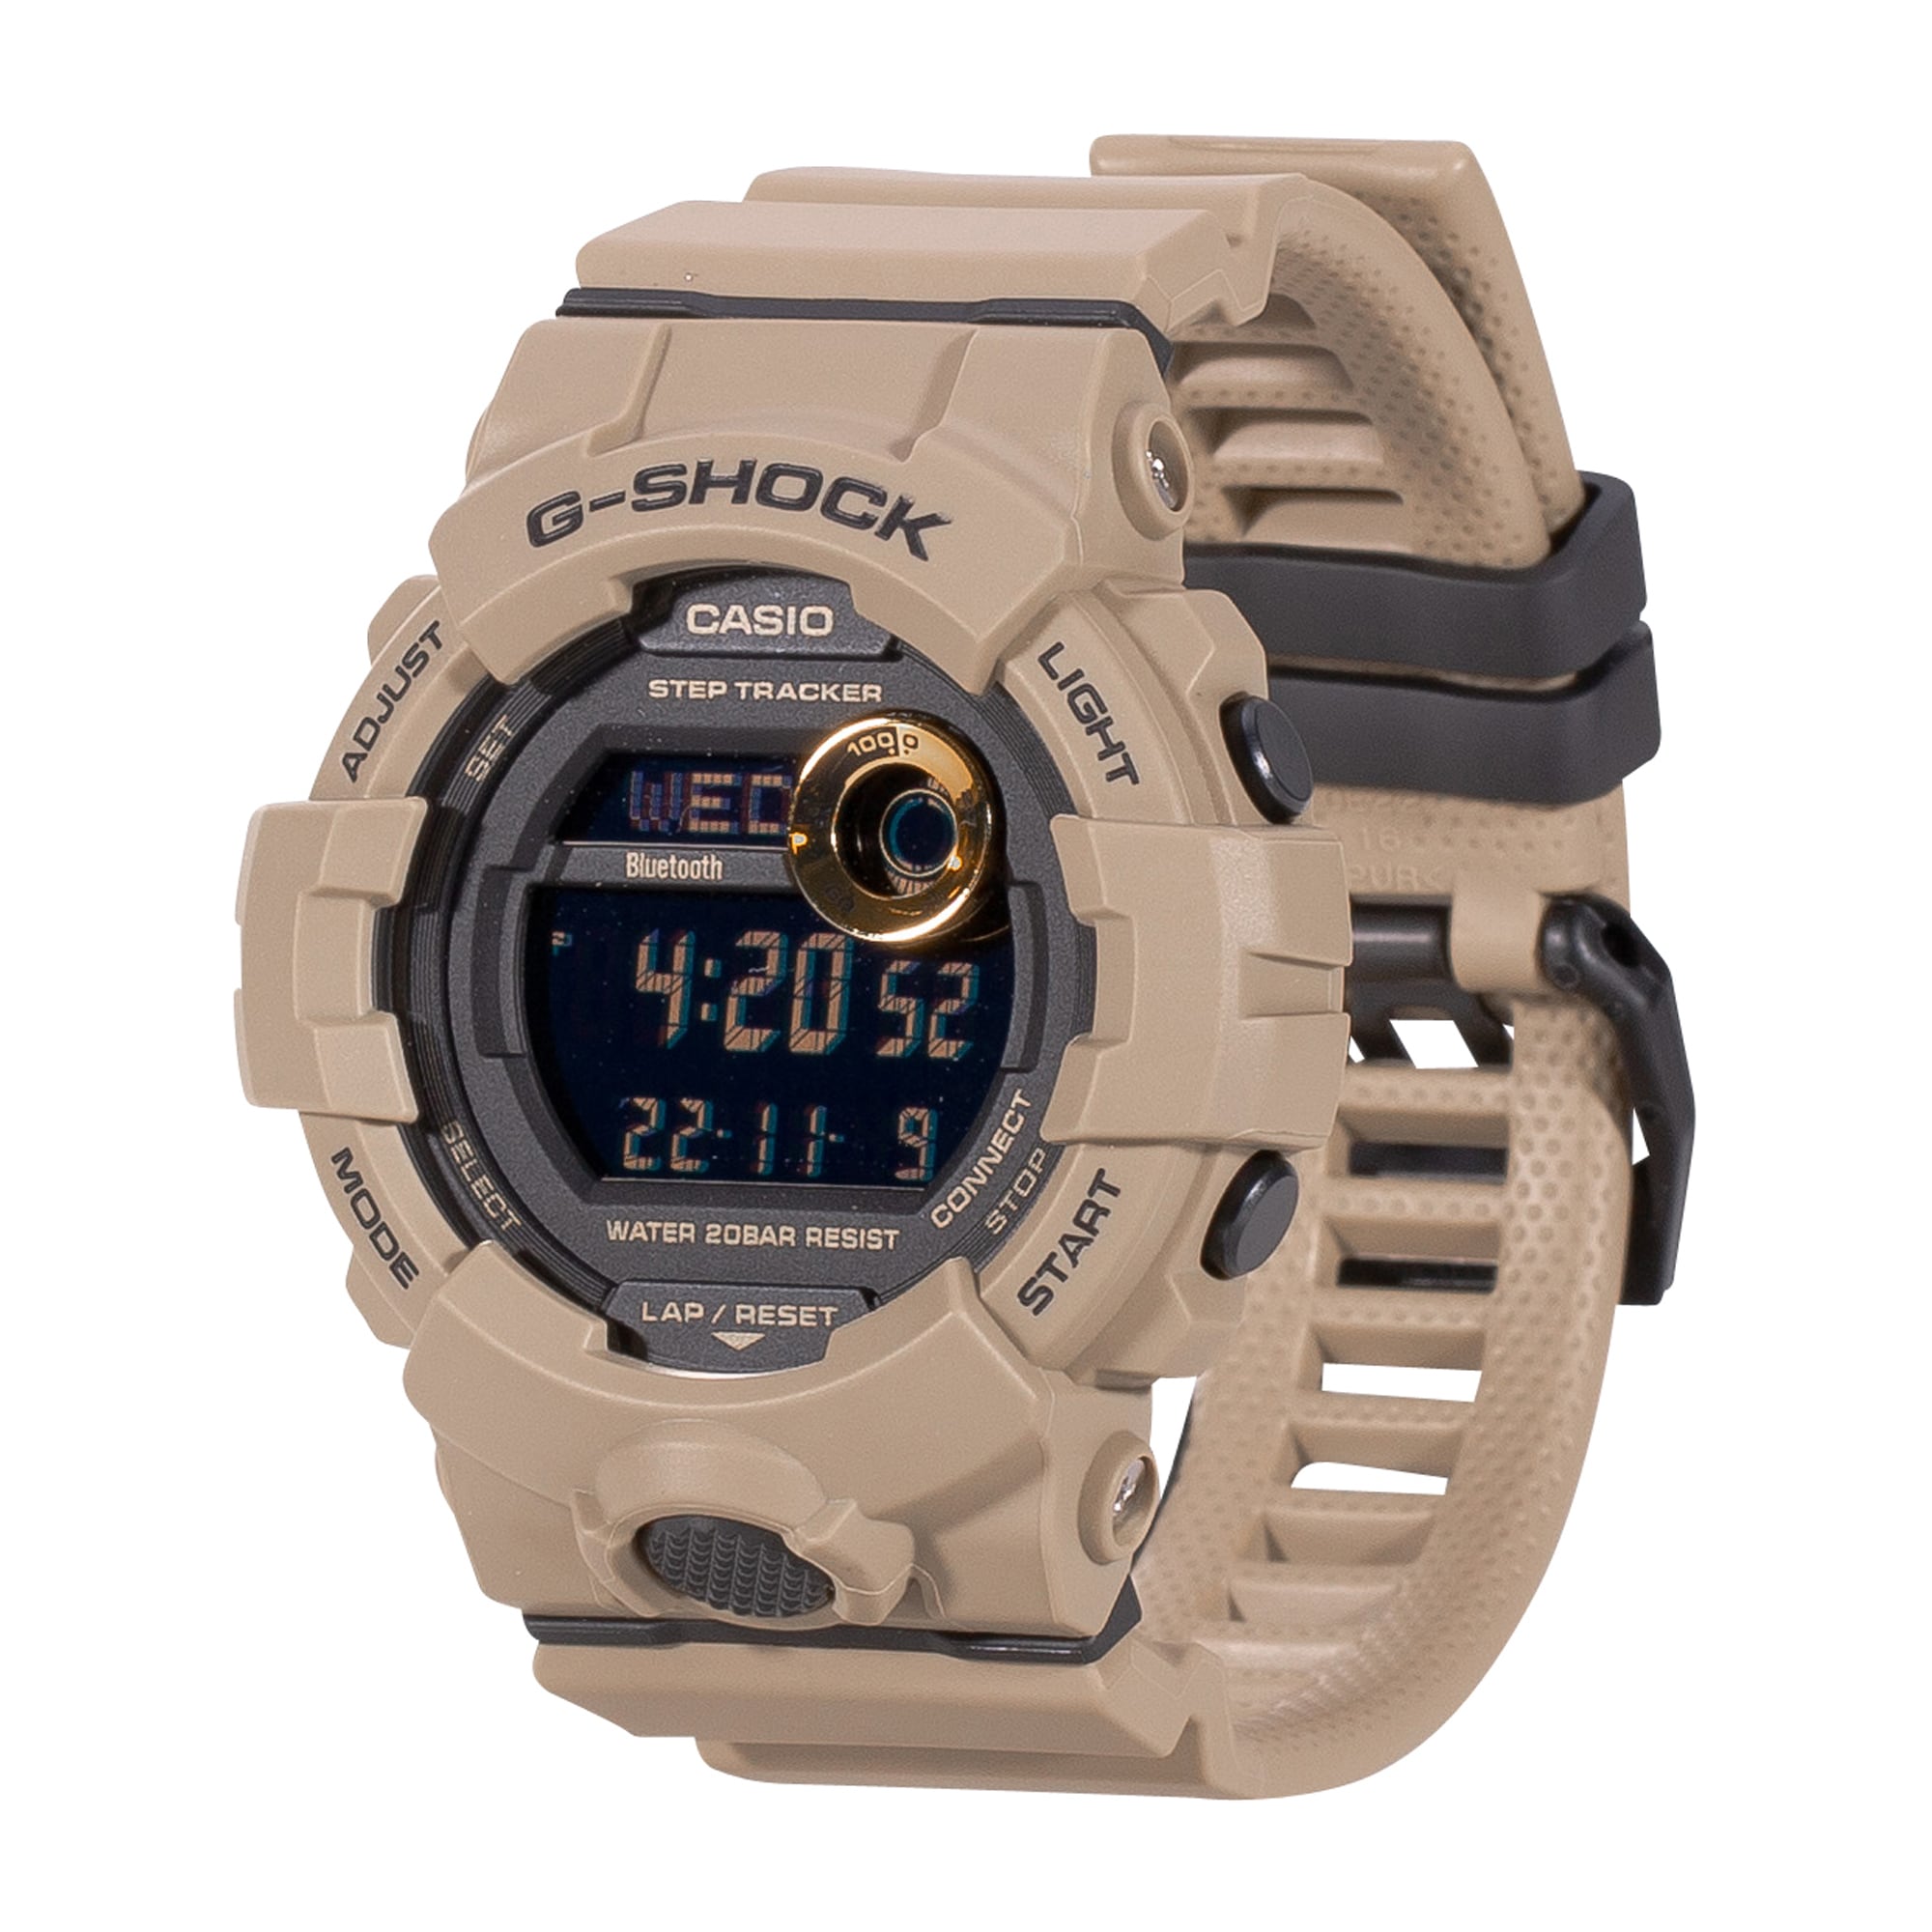 GBD-800UC-5ER th G-Squad Casio coyote Purchase G-Shock Watch by